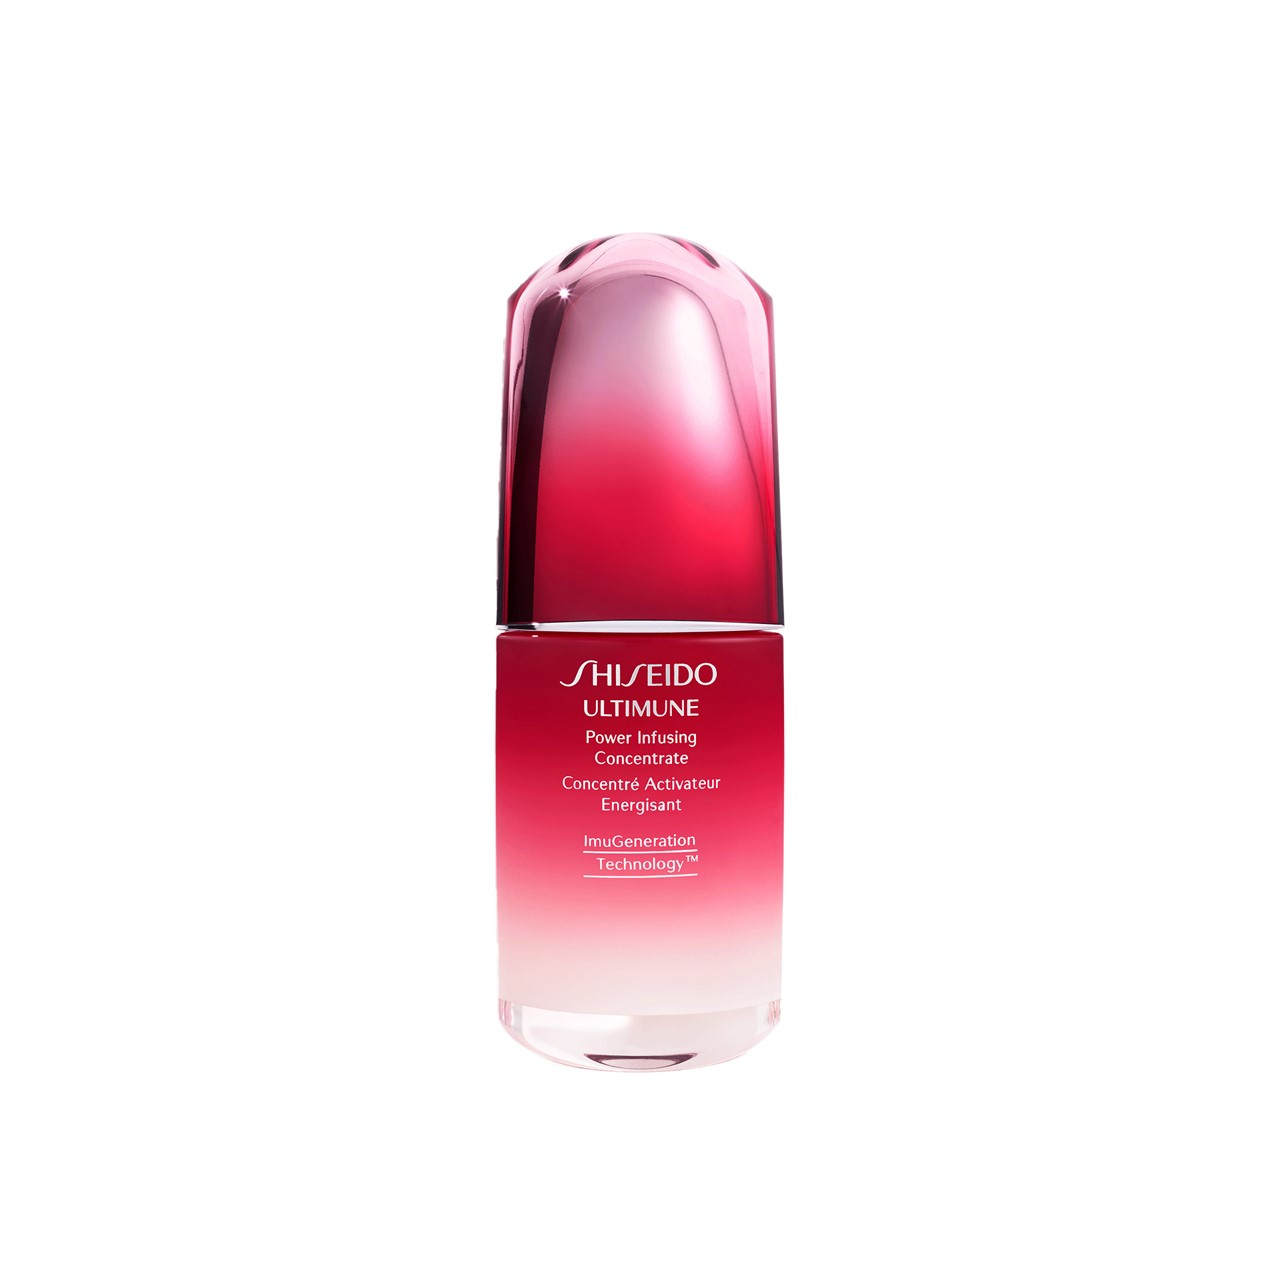 Shiseido Ultimune Power Infusing Concentrate 30ml (1.01fl oz)